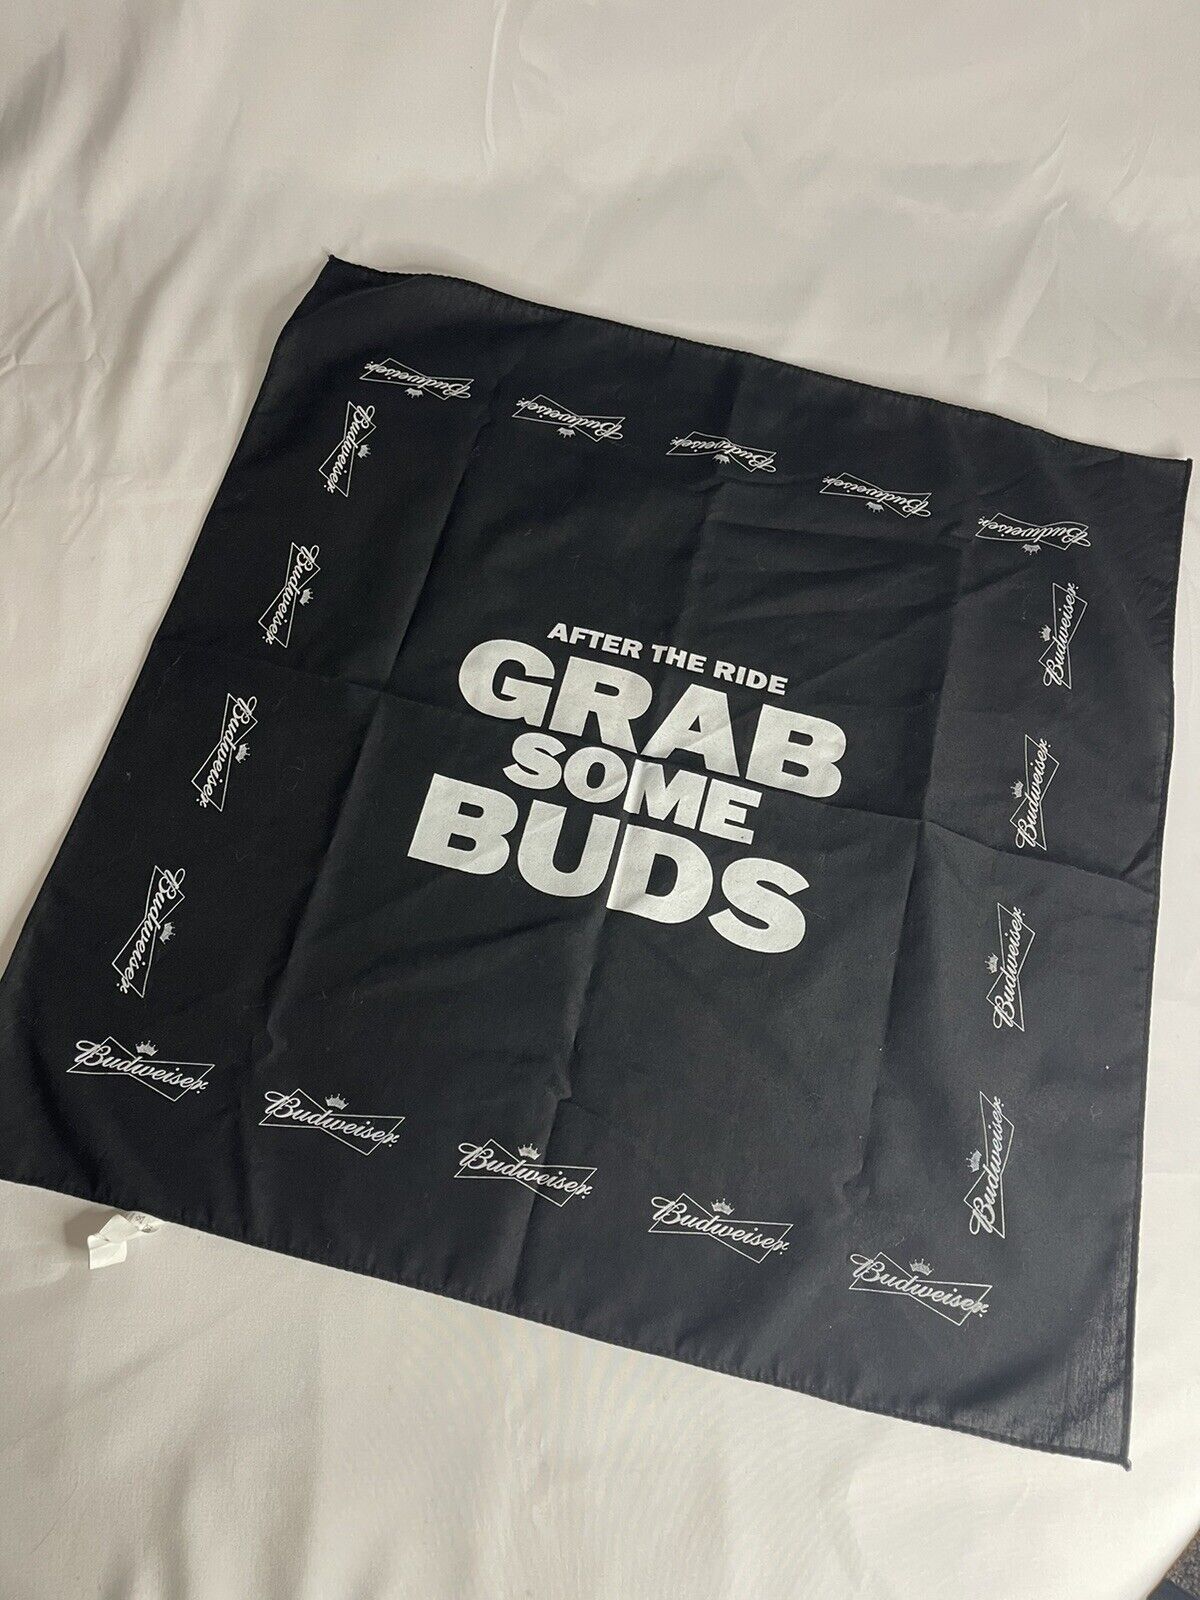 BUDWEISER Anheuser Busch BANDANA King of BEERS Breweriana “Grab Some Buds “